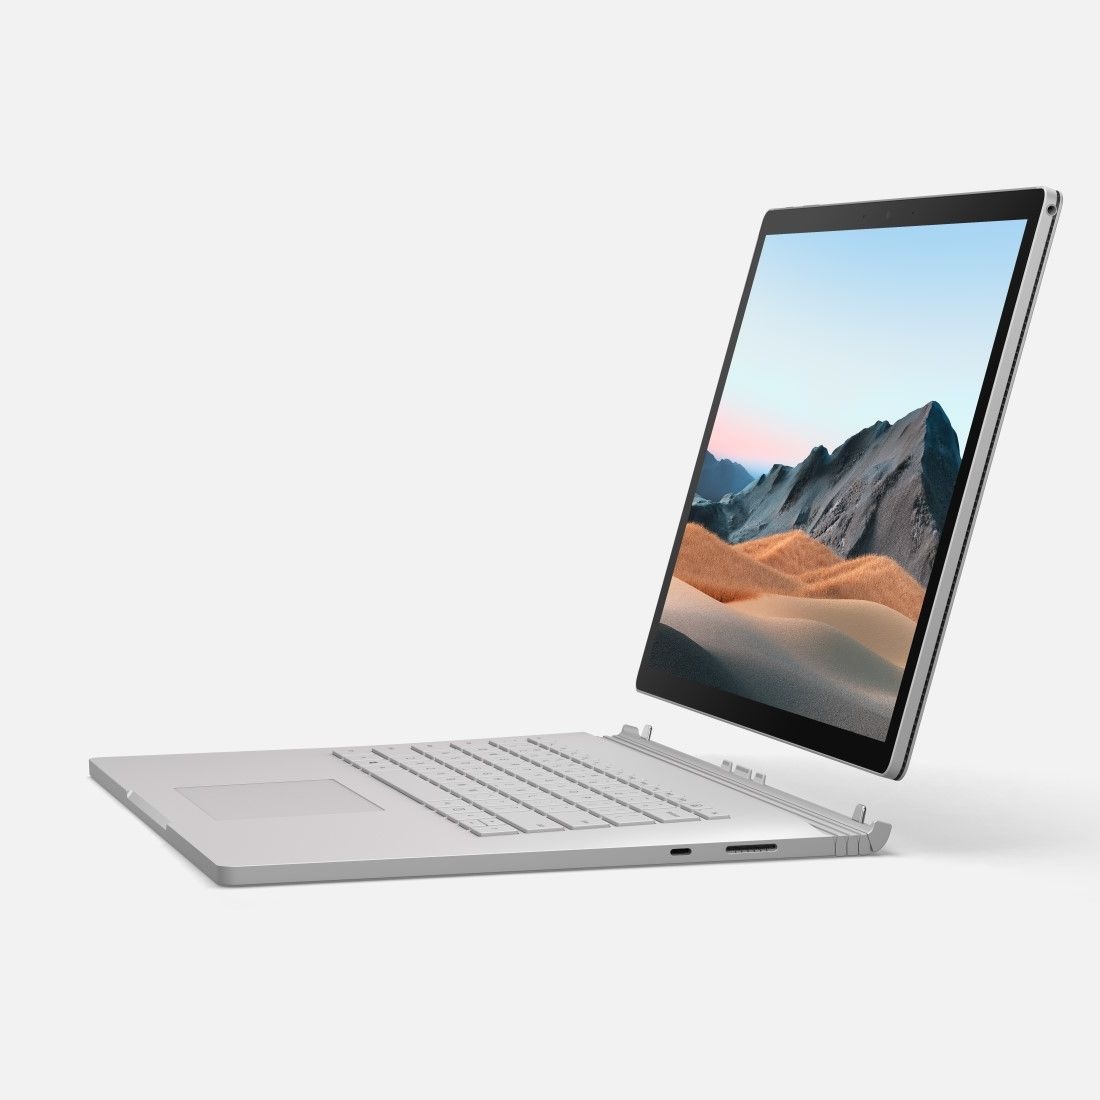 Microsoft Surface Book 3 All-in-One Business Laptop i7 1065G7 10th Gen/32GB/1TB SSD/NVIDIA GeForce GTX 1660 6GB/15-inch Display/Windows 10/Platinum